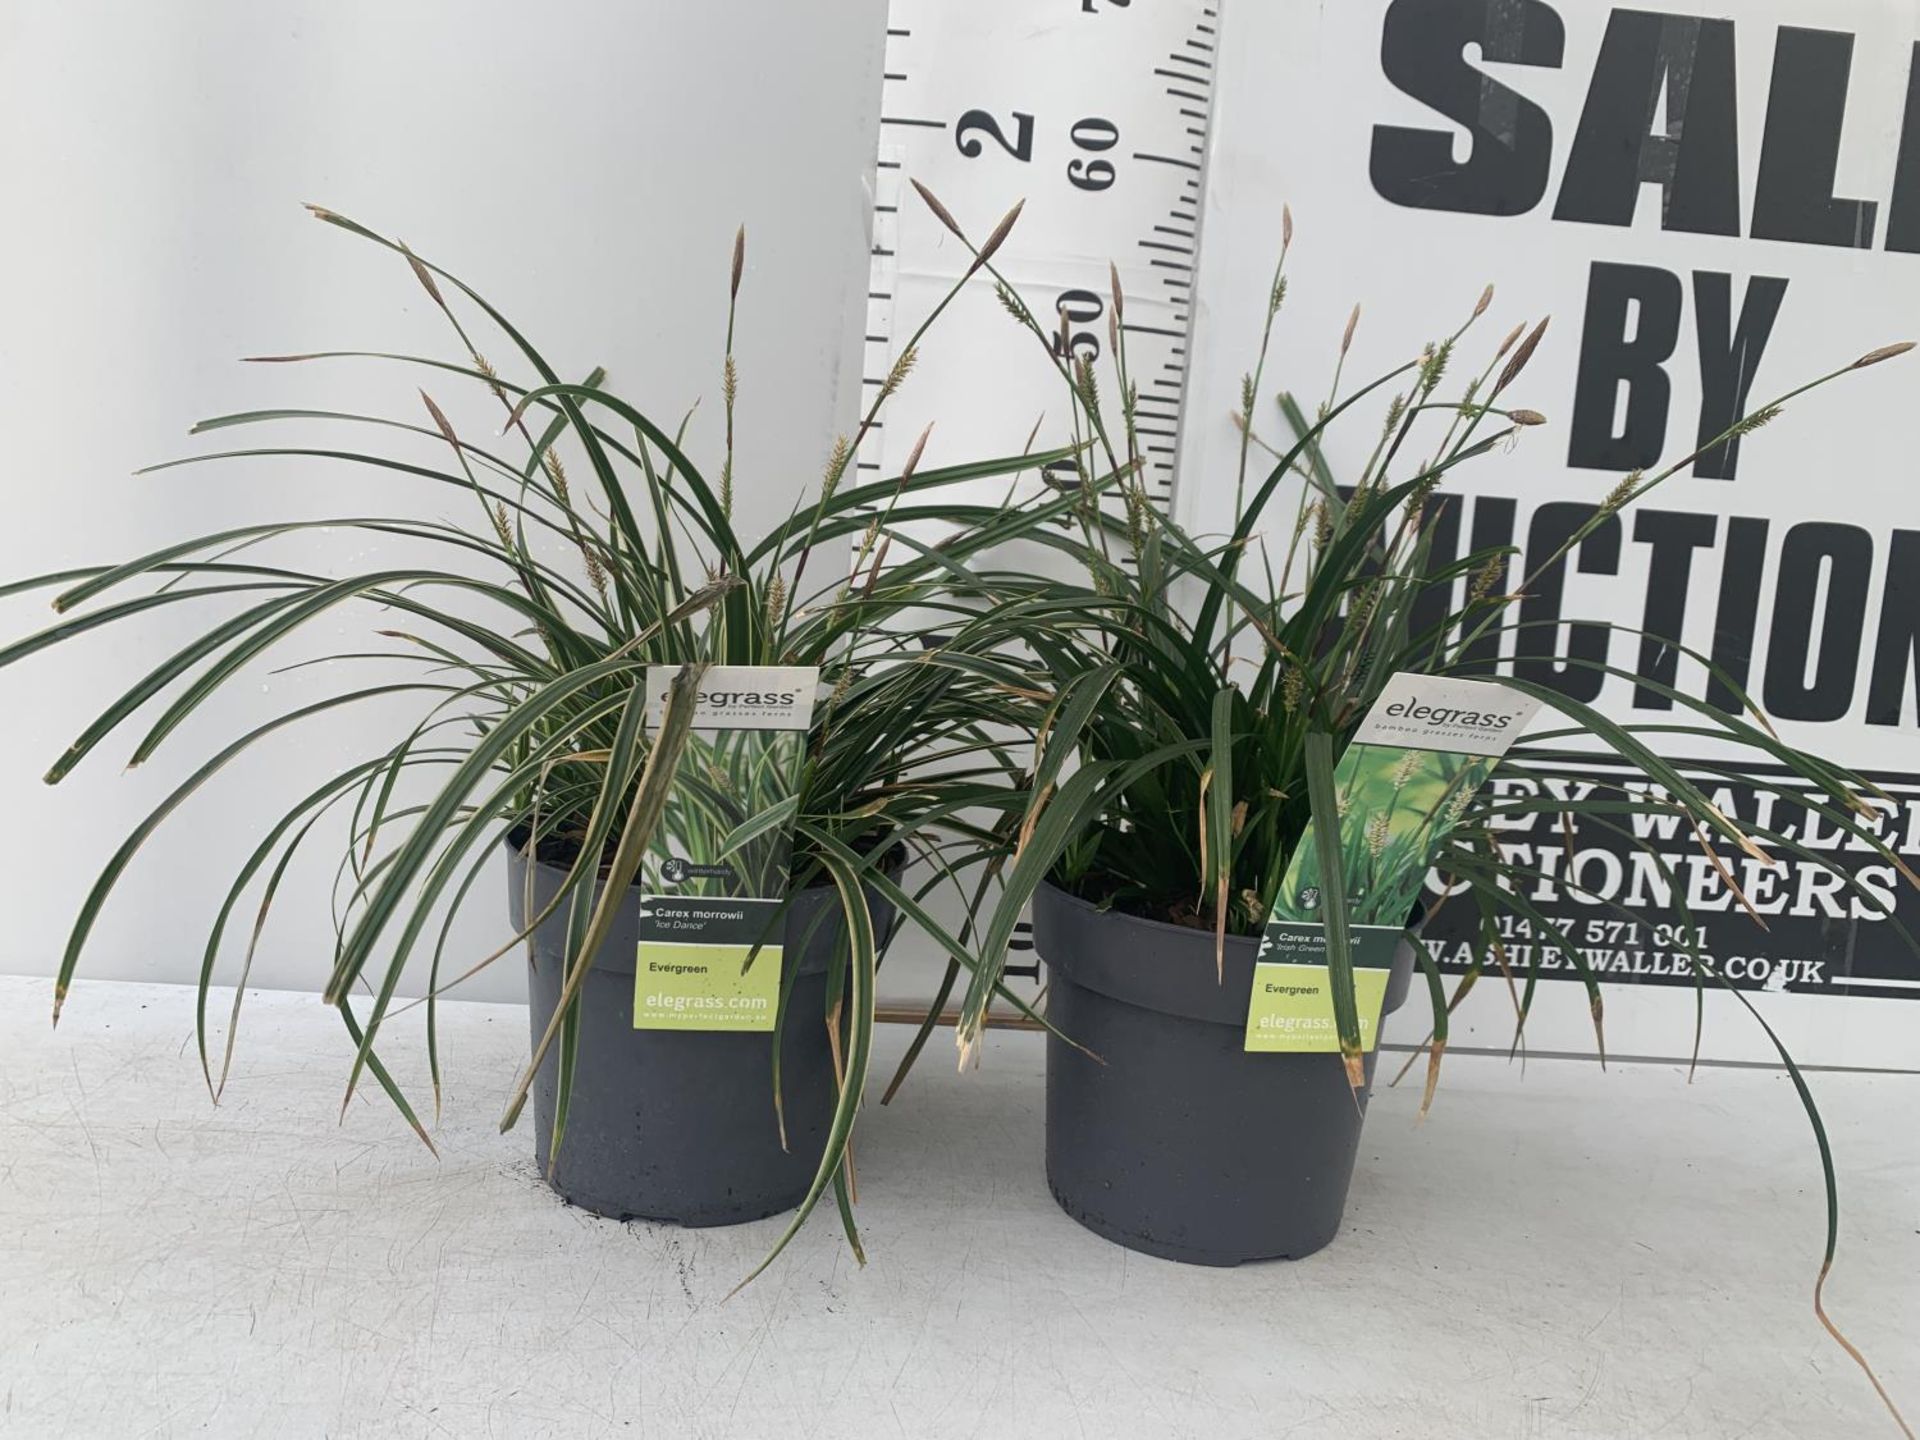 TWO HARDY ORNAMENTAL GRASSES CAREX MORROWII 'ICE DANCE' AND 'IRISH GREEN' IN 3 LTR POTS APPROX